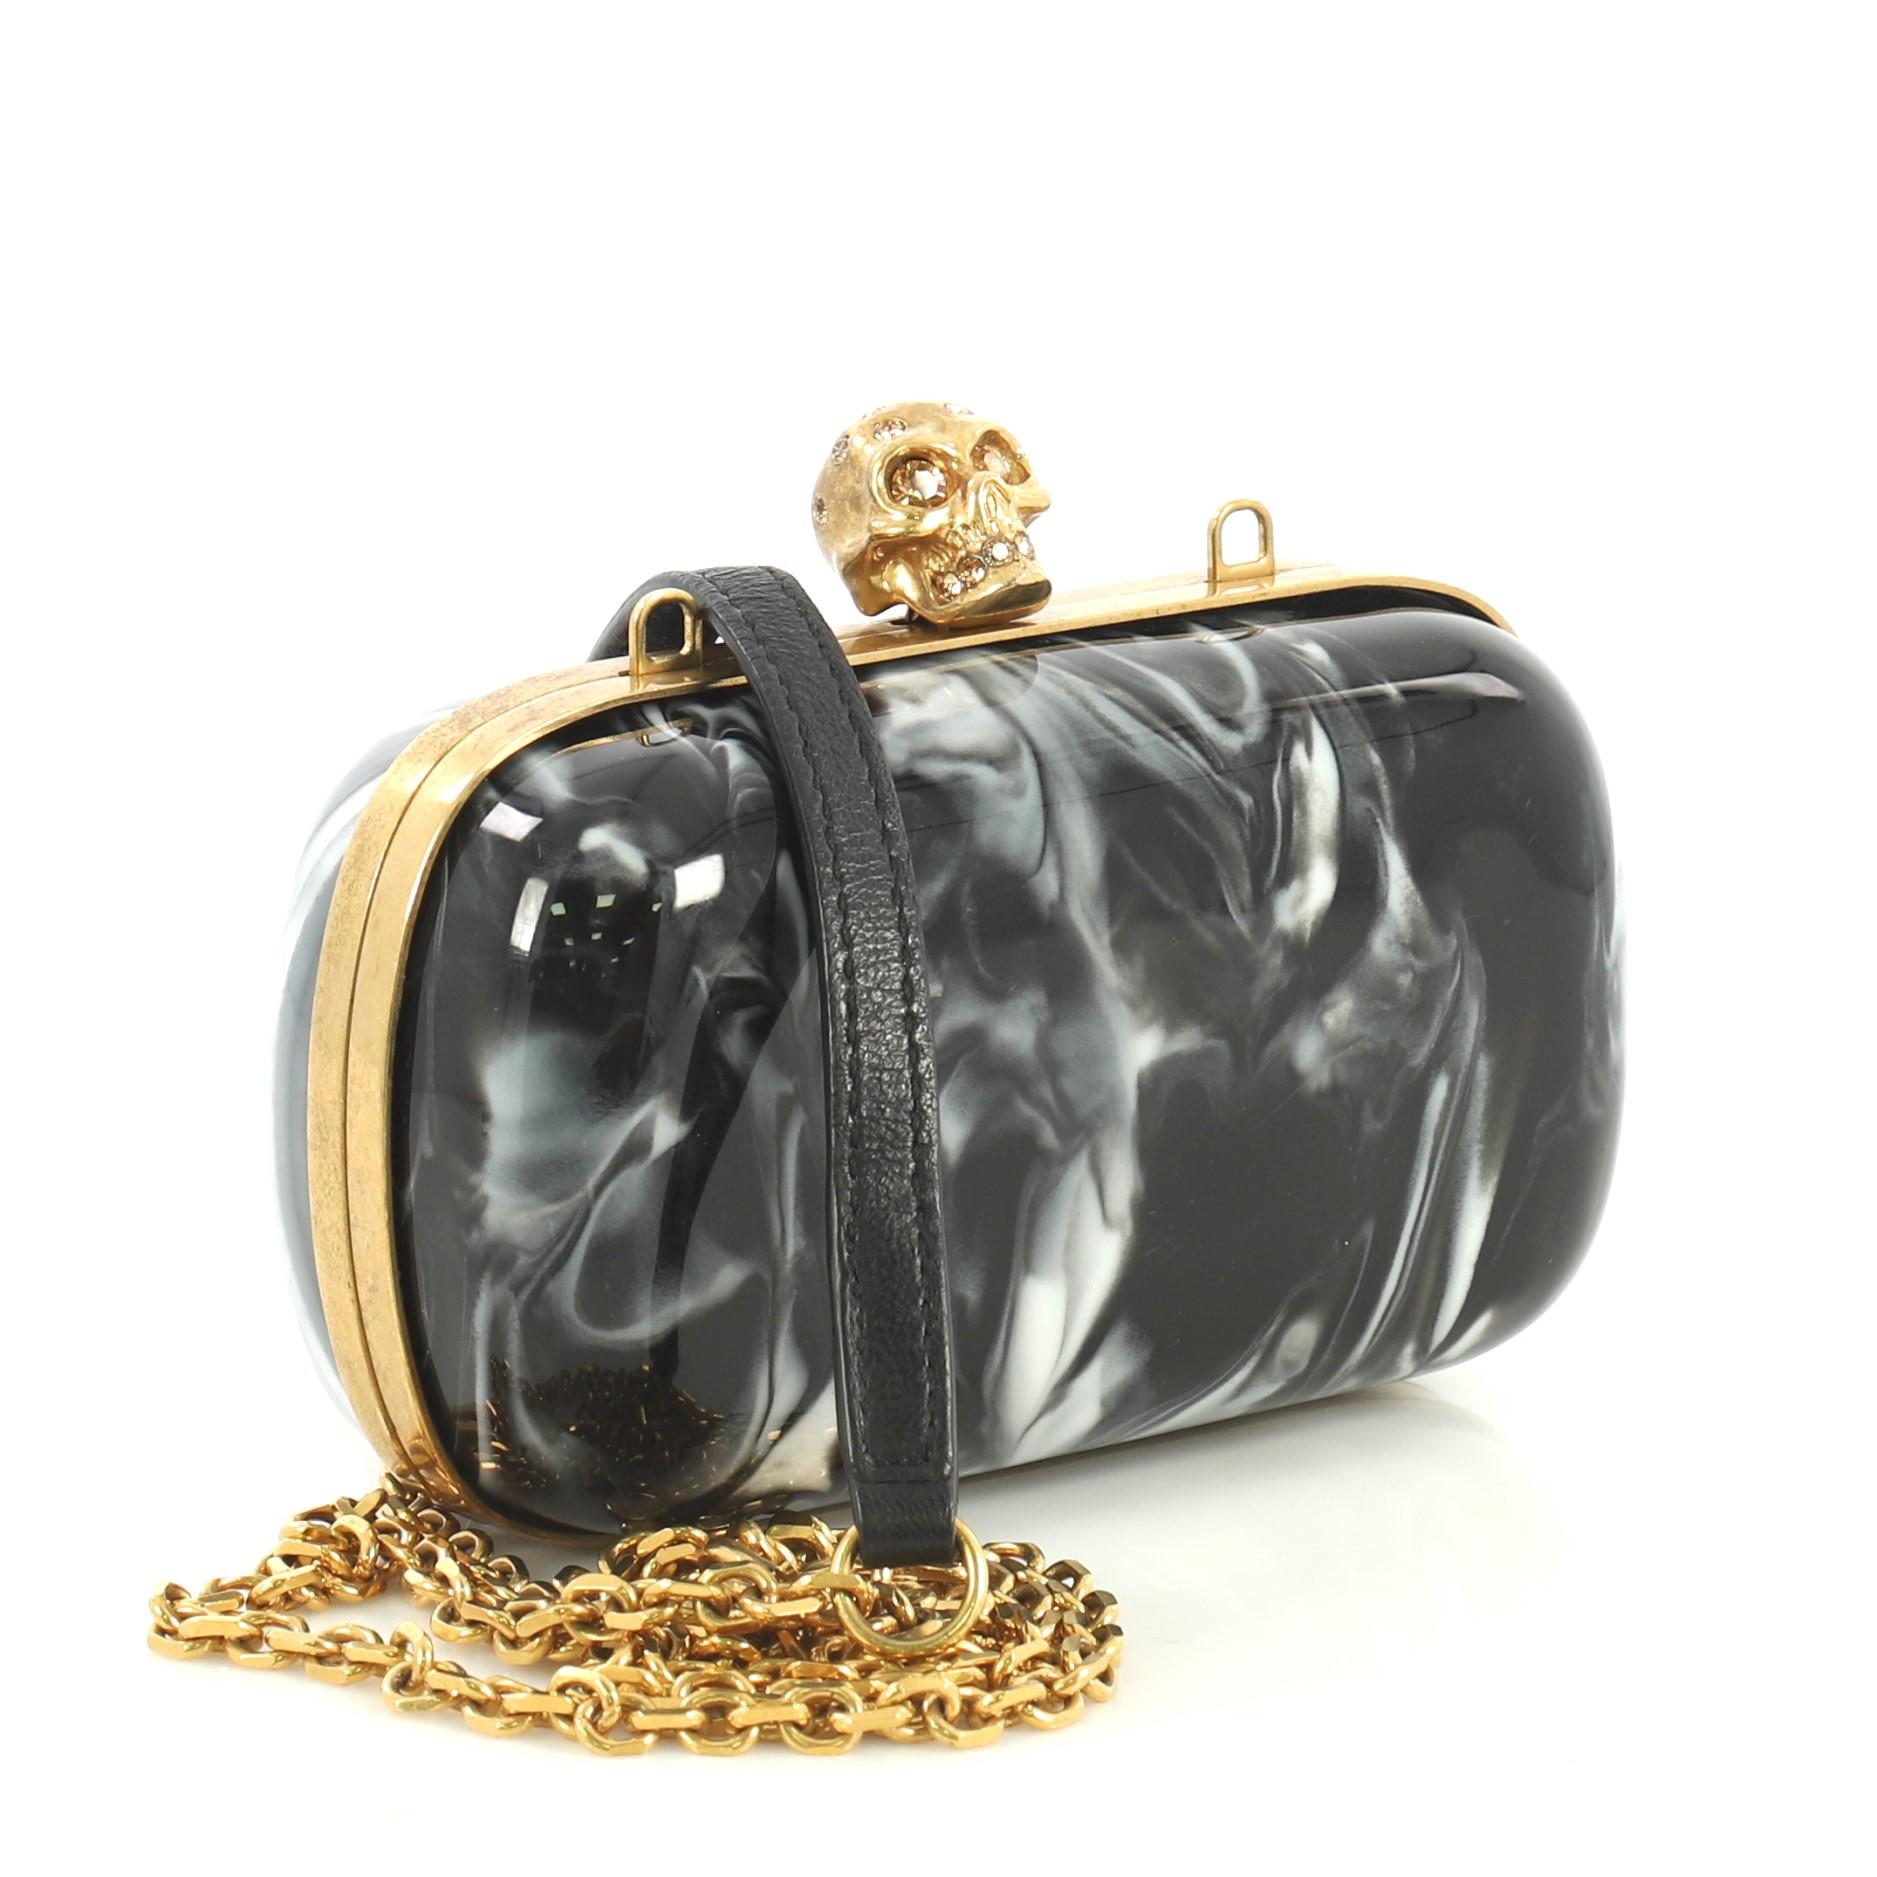 This Alexander McQueen Skull Box Clutch Marbled Plexiglass Small, crafted from black plexiglass, features iconic skull clasp with crystal embellishments, hinged metal frame, and aged gold-tone hardware. Its skull clasp closure opens to a black